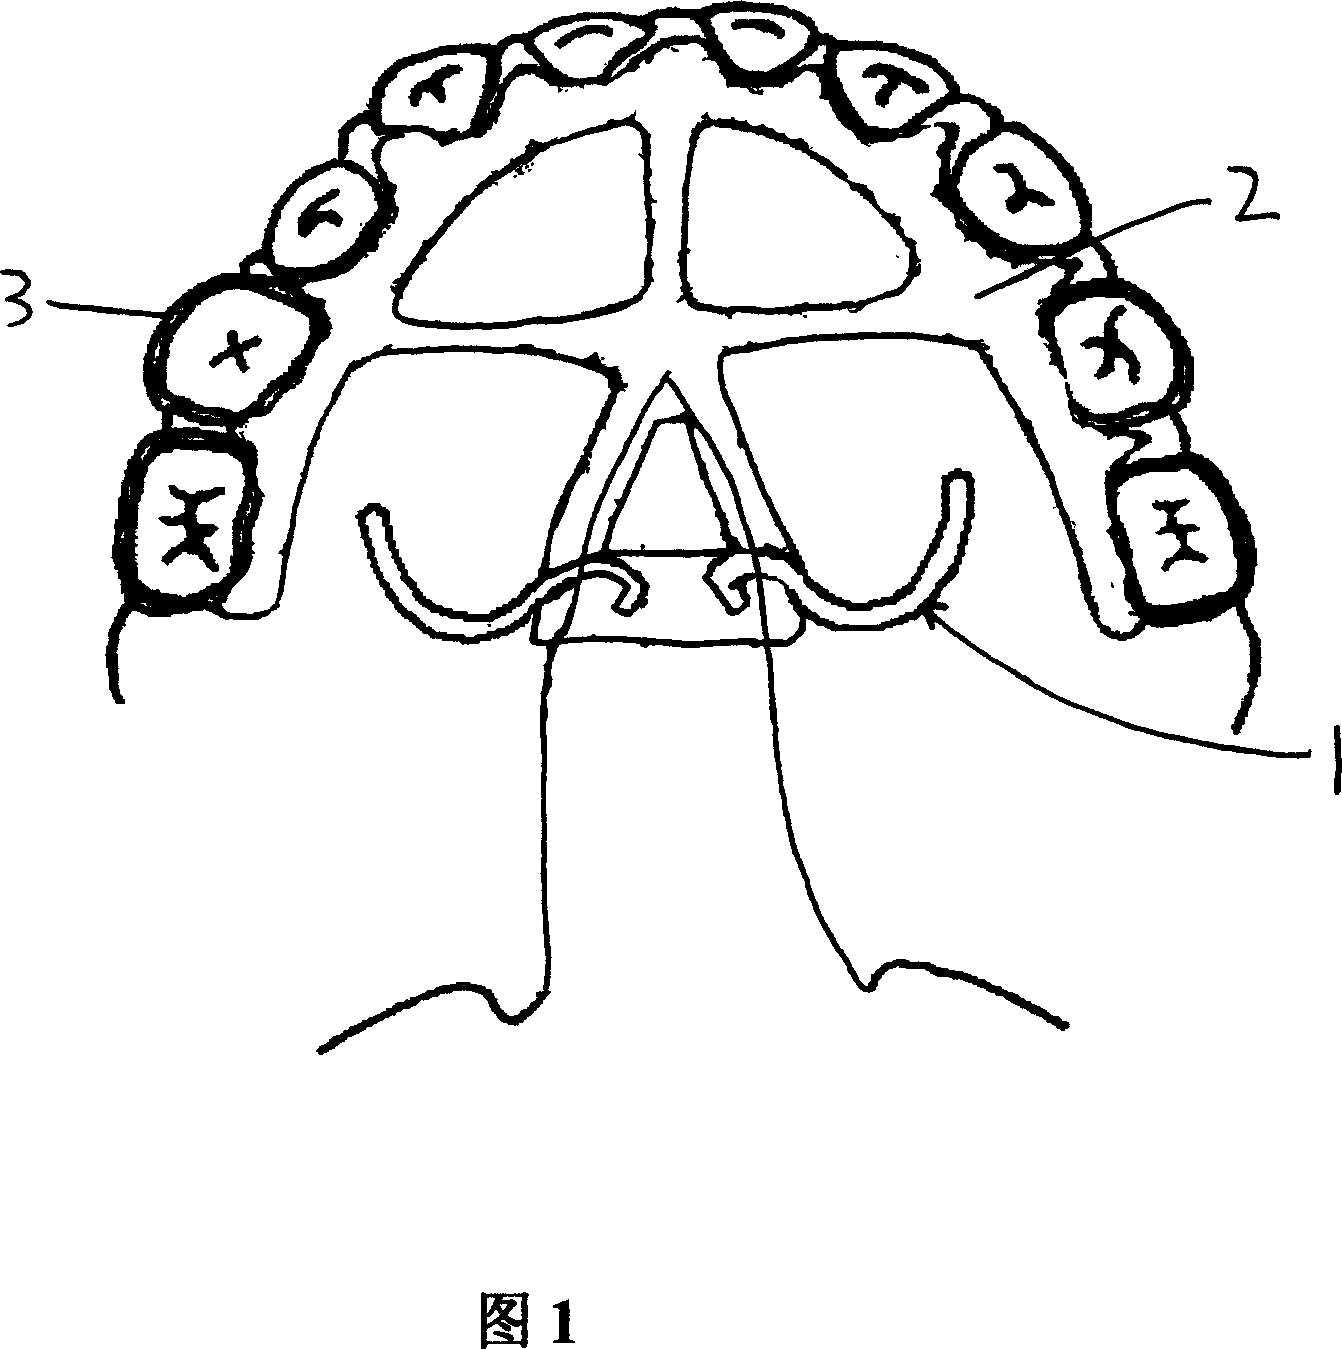 Traction device used in oral cavity for treating cleft palate made of nickel-titanium memory alloy